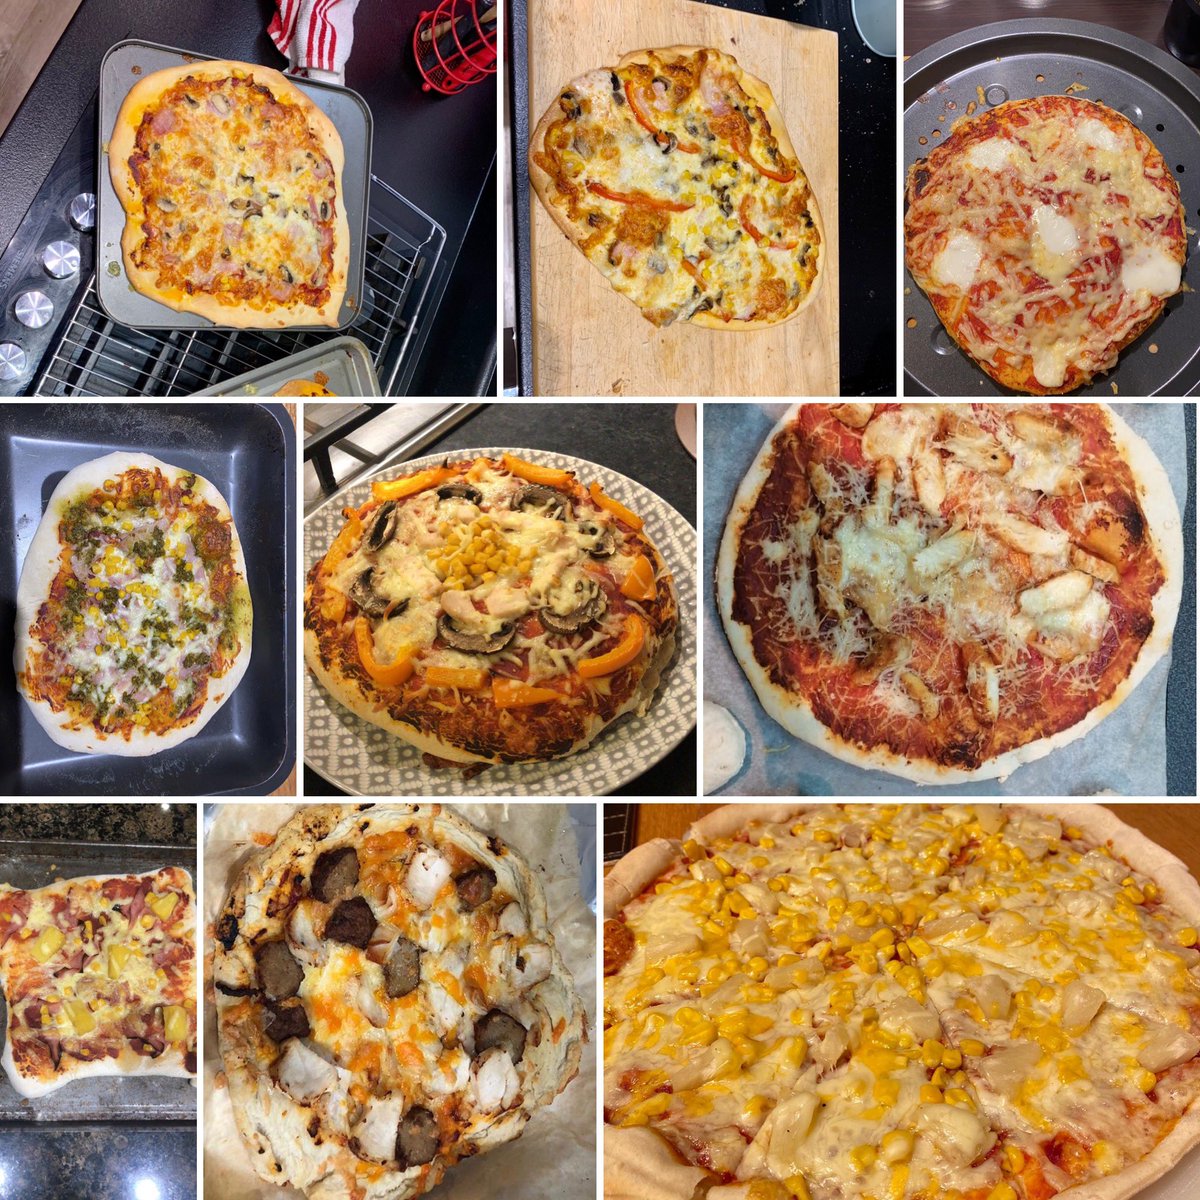 Great evening online cooking with @DerventioeXcel Regional squad making pizzas 🍕 Super yummy!!

Well done everyone and hope you enjoyed it!! 👏🏻👏🏻👏🏻

#VirtualCookingLesson #PizzaMaking #YummyFood #HealthyToppings #SwimFamily #OnlineCooking #TeamDX